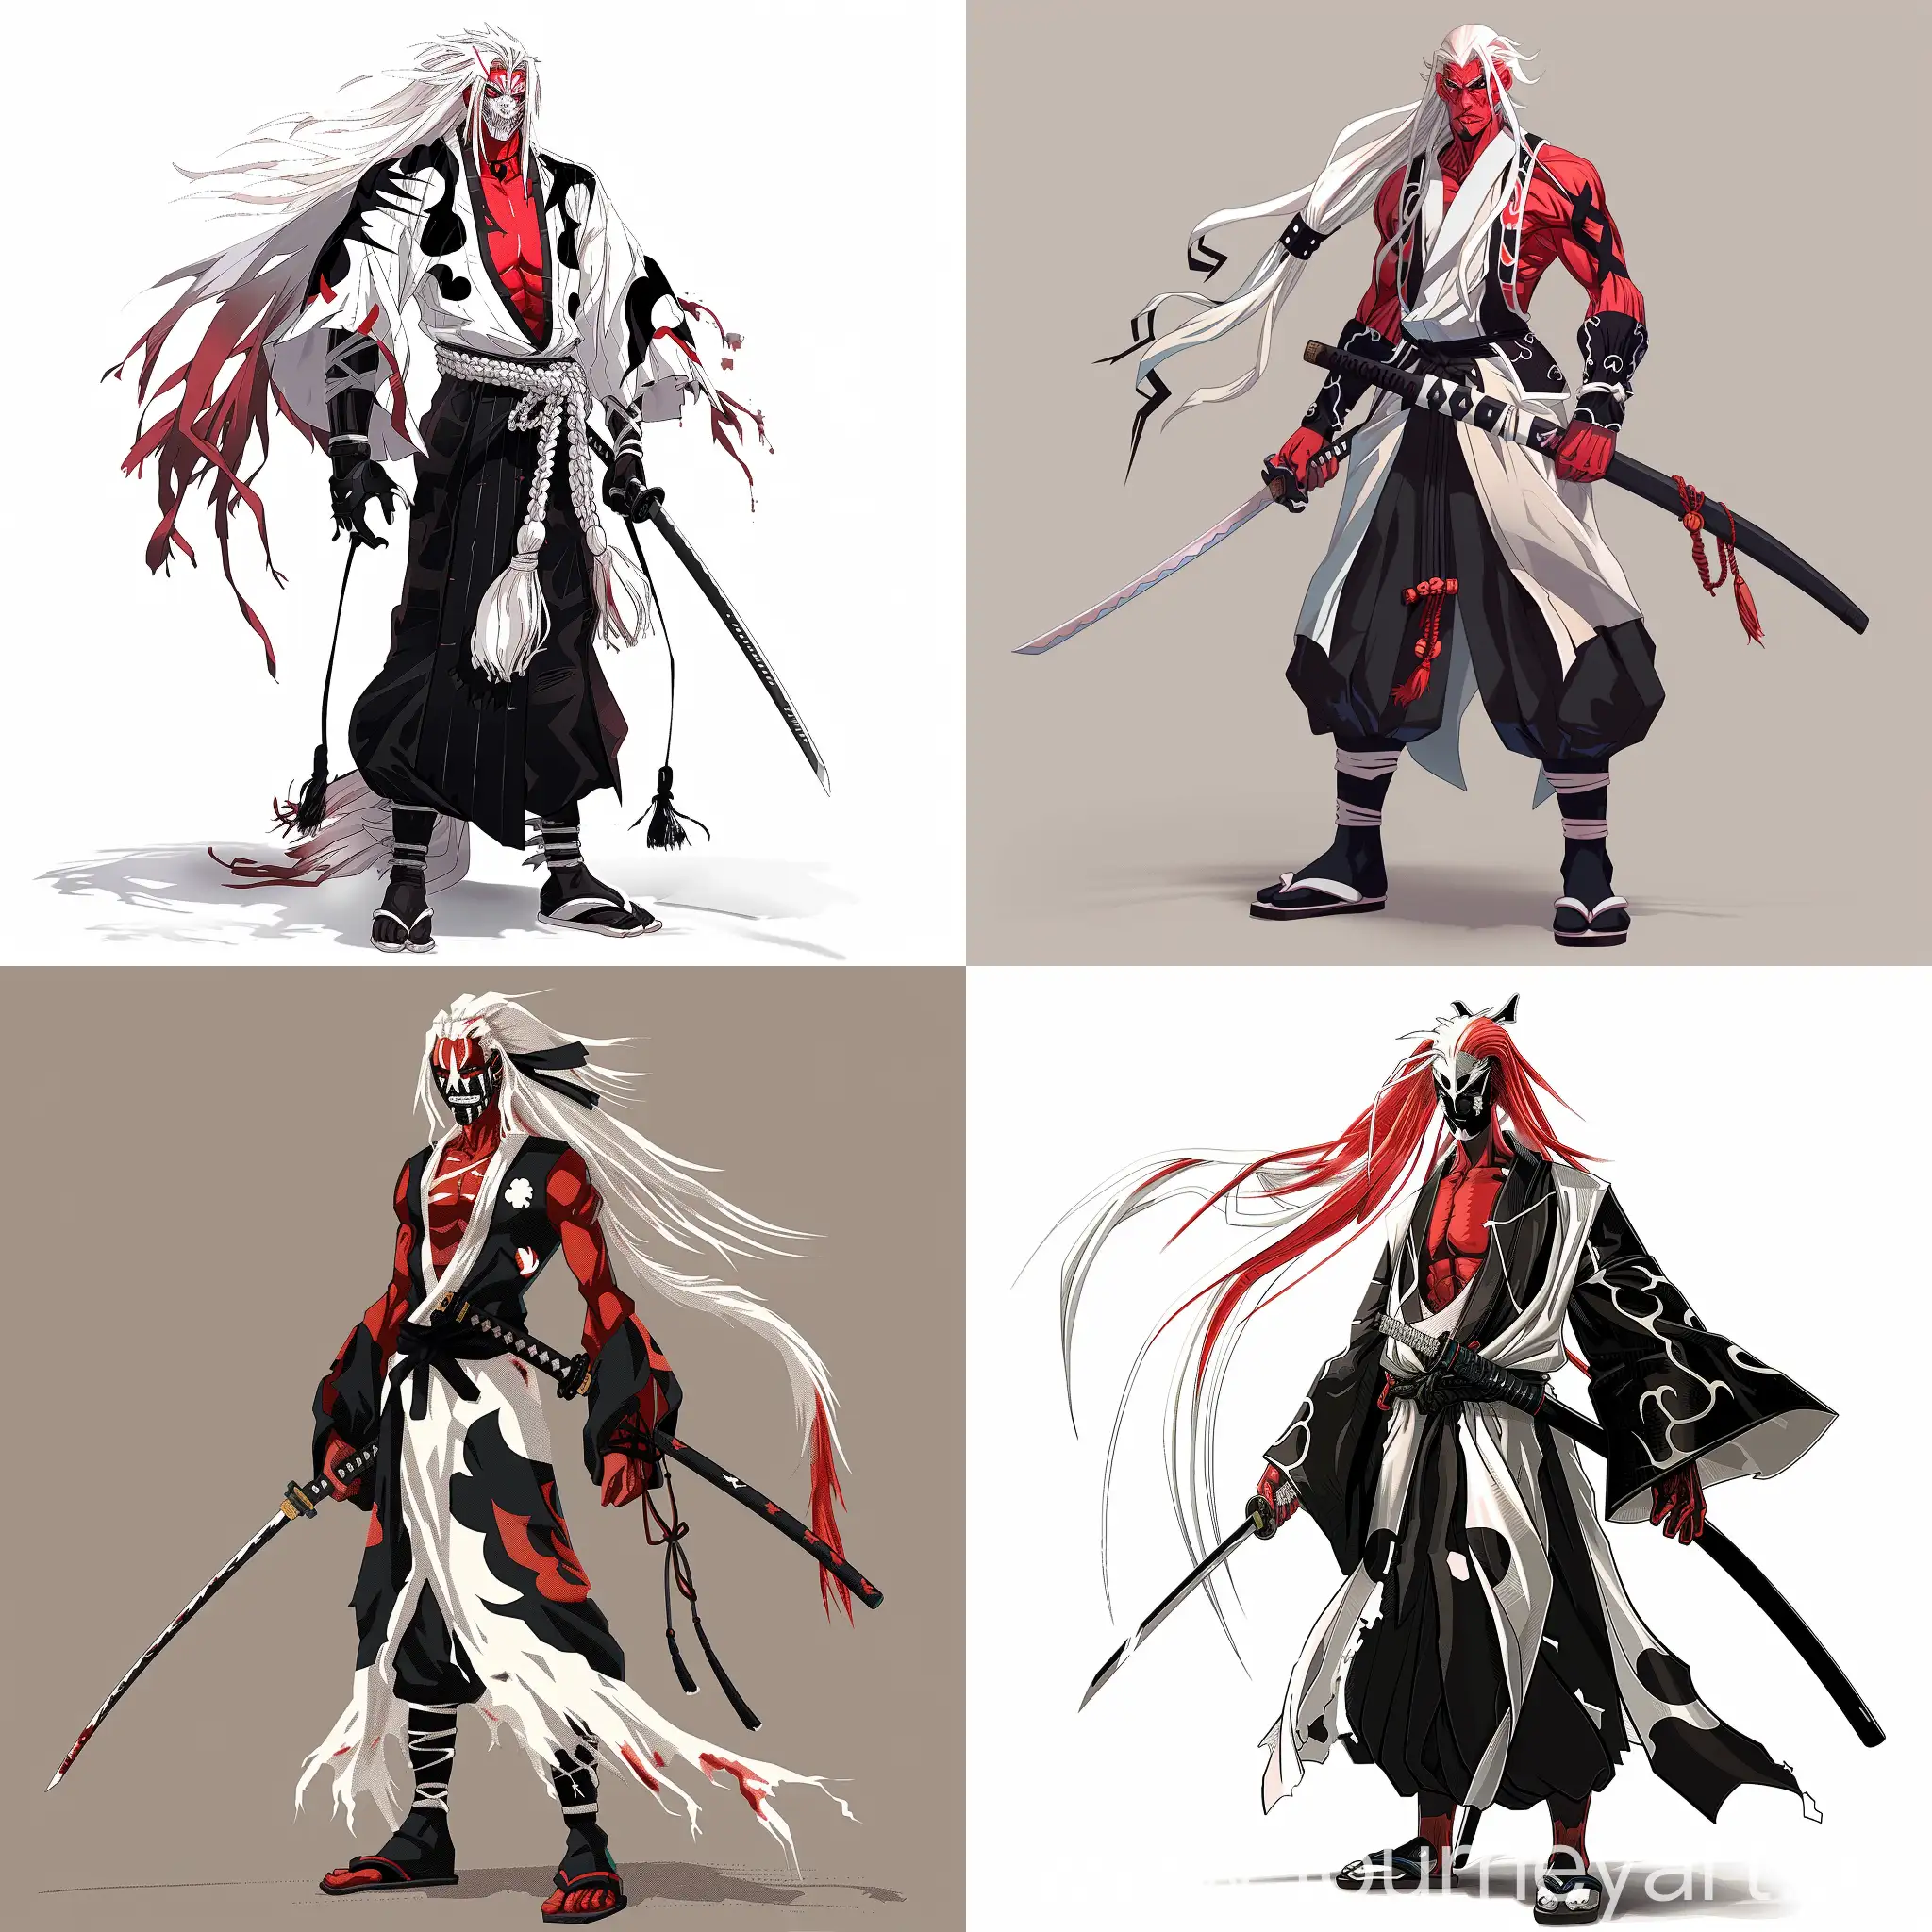 Create a 64 bit pixel detailed character art featuring a man with red skin, long white hair, Black shoes, bleach style black and white costume and a katana in hand 